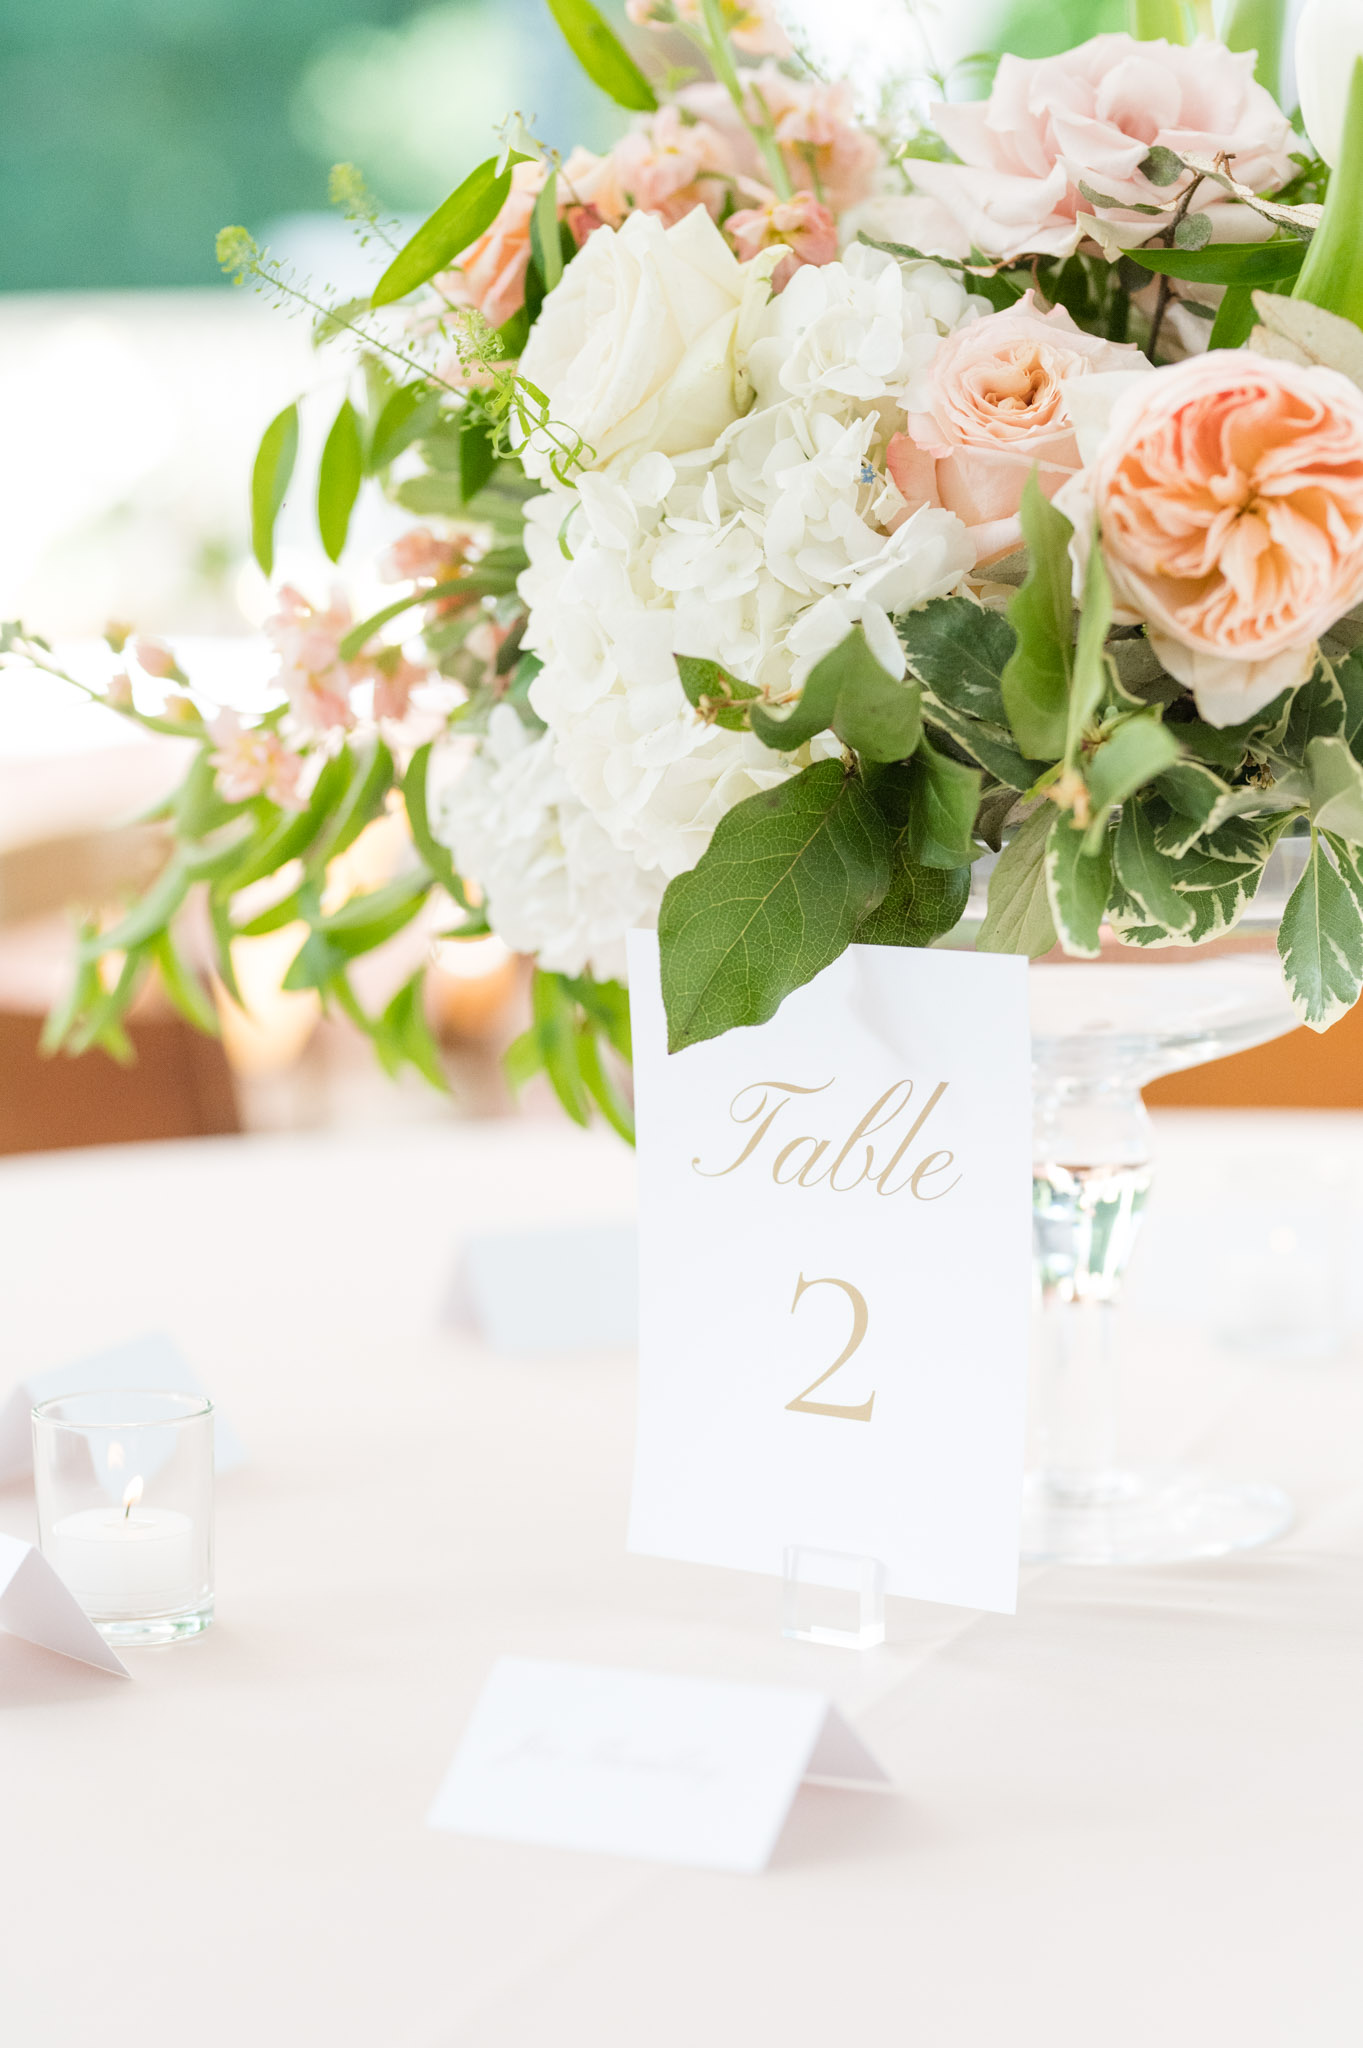 Closeup of table numbers and floral arrangements.